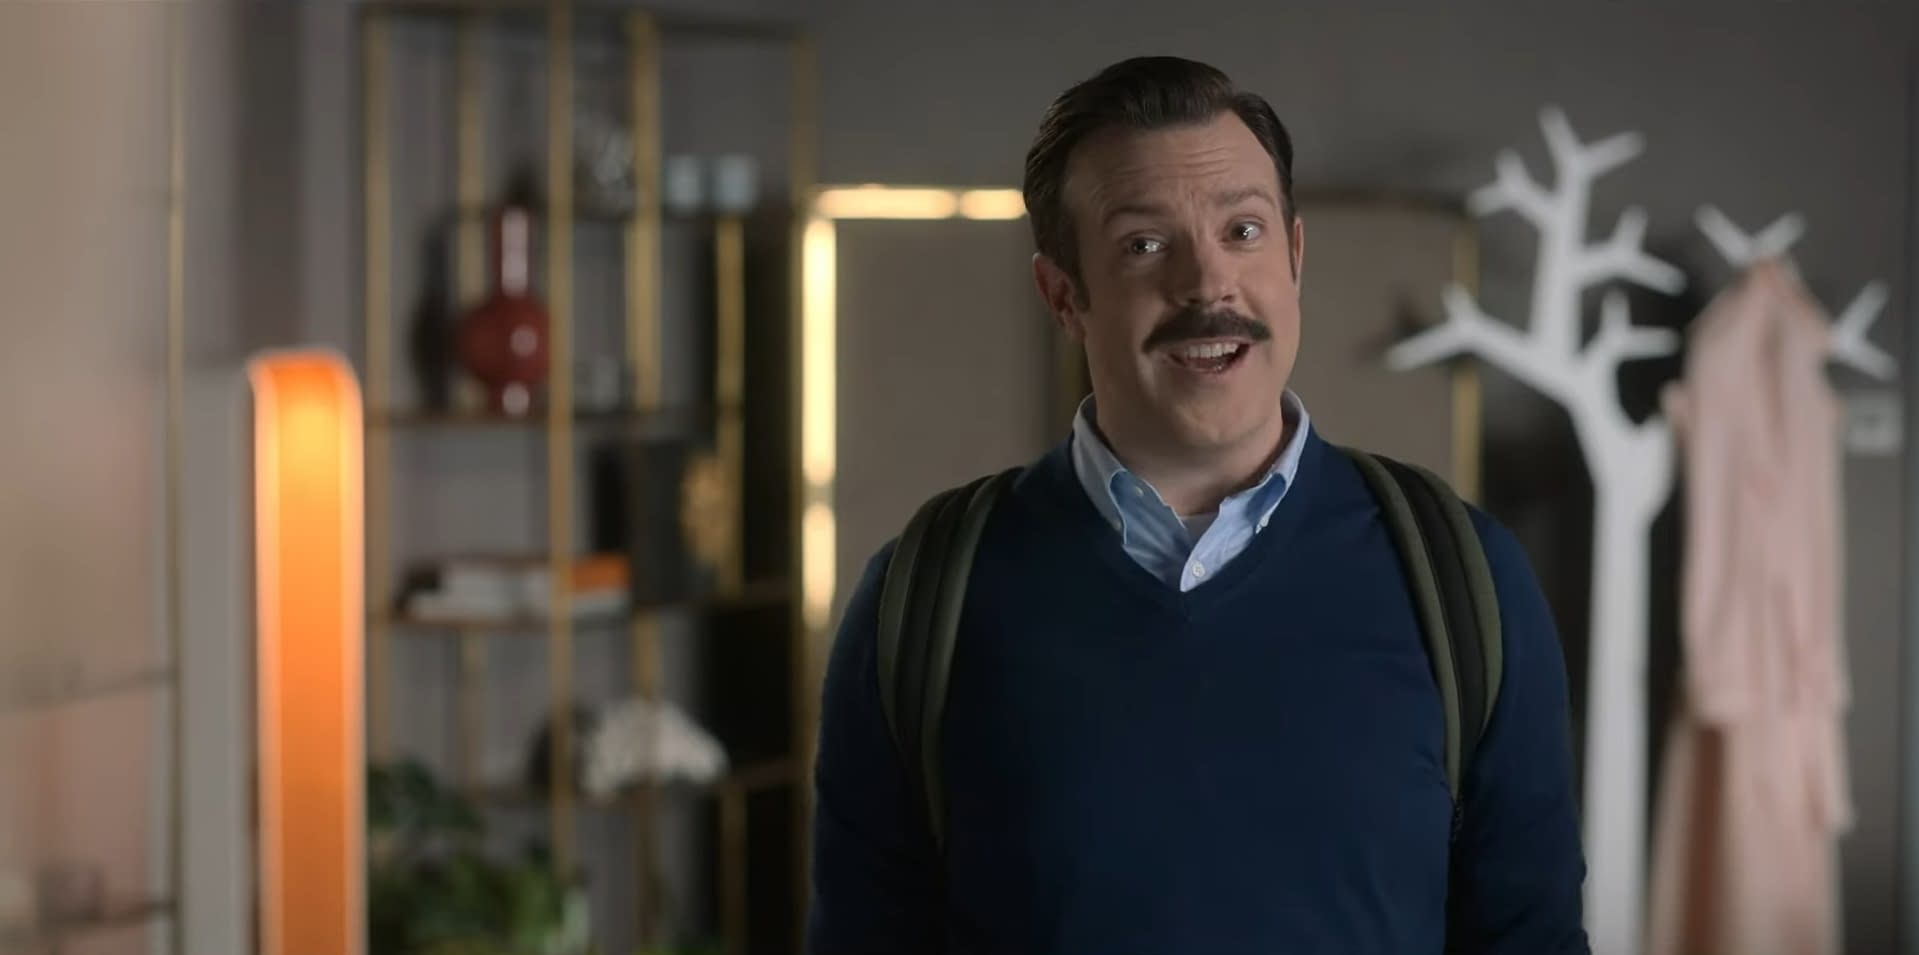 Ted Lasso' Season 3 Drops First Full Trailer